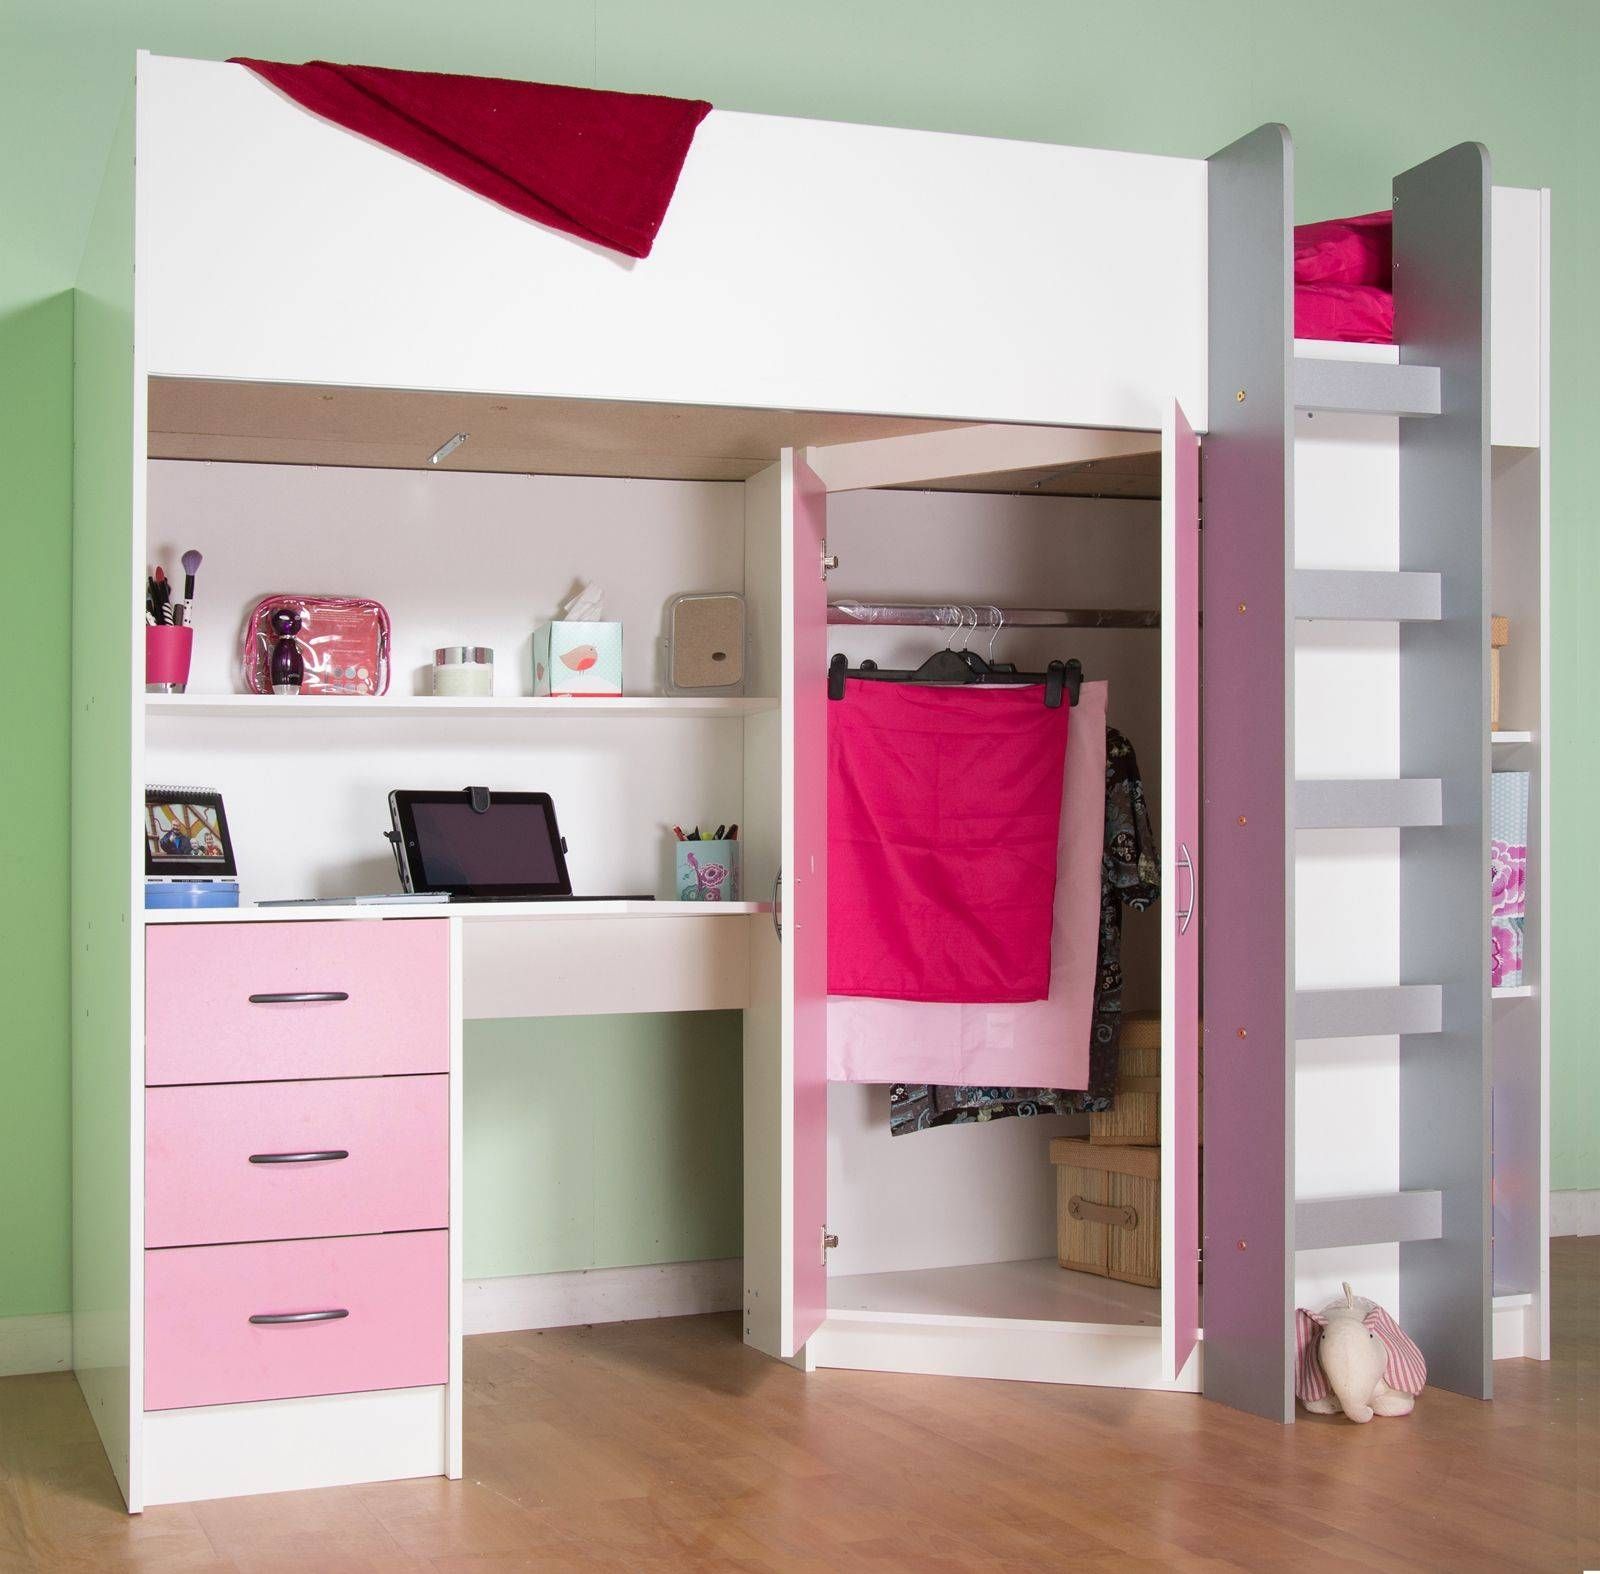 Calder White Or White Blue Or White Pink High Sleeper Cabin Bed Throughout High Sleeper With Desk And Wardrobes (View 1 of 15)